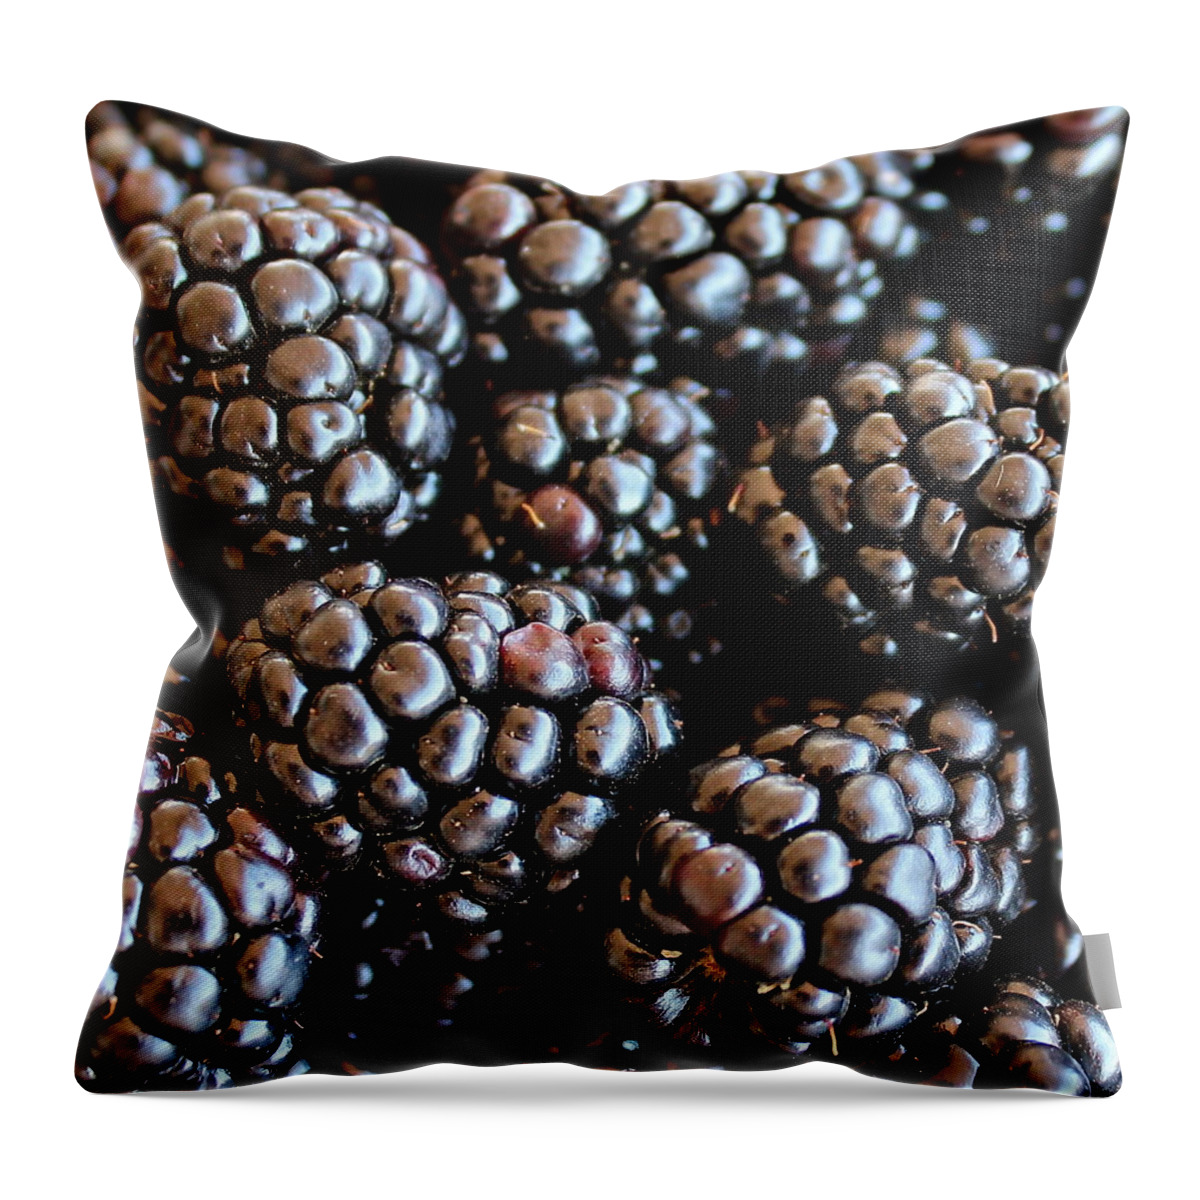 Blackberries Throw Pillow featuring the photograph Blackberries by Kume Bryant